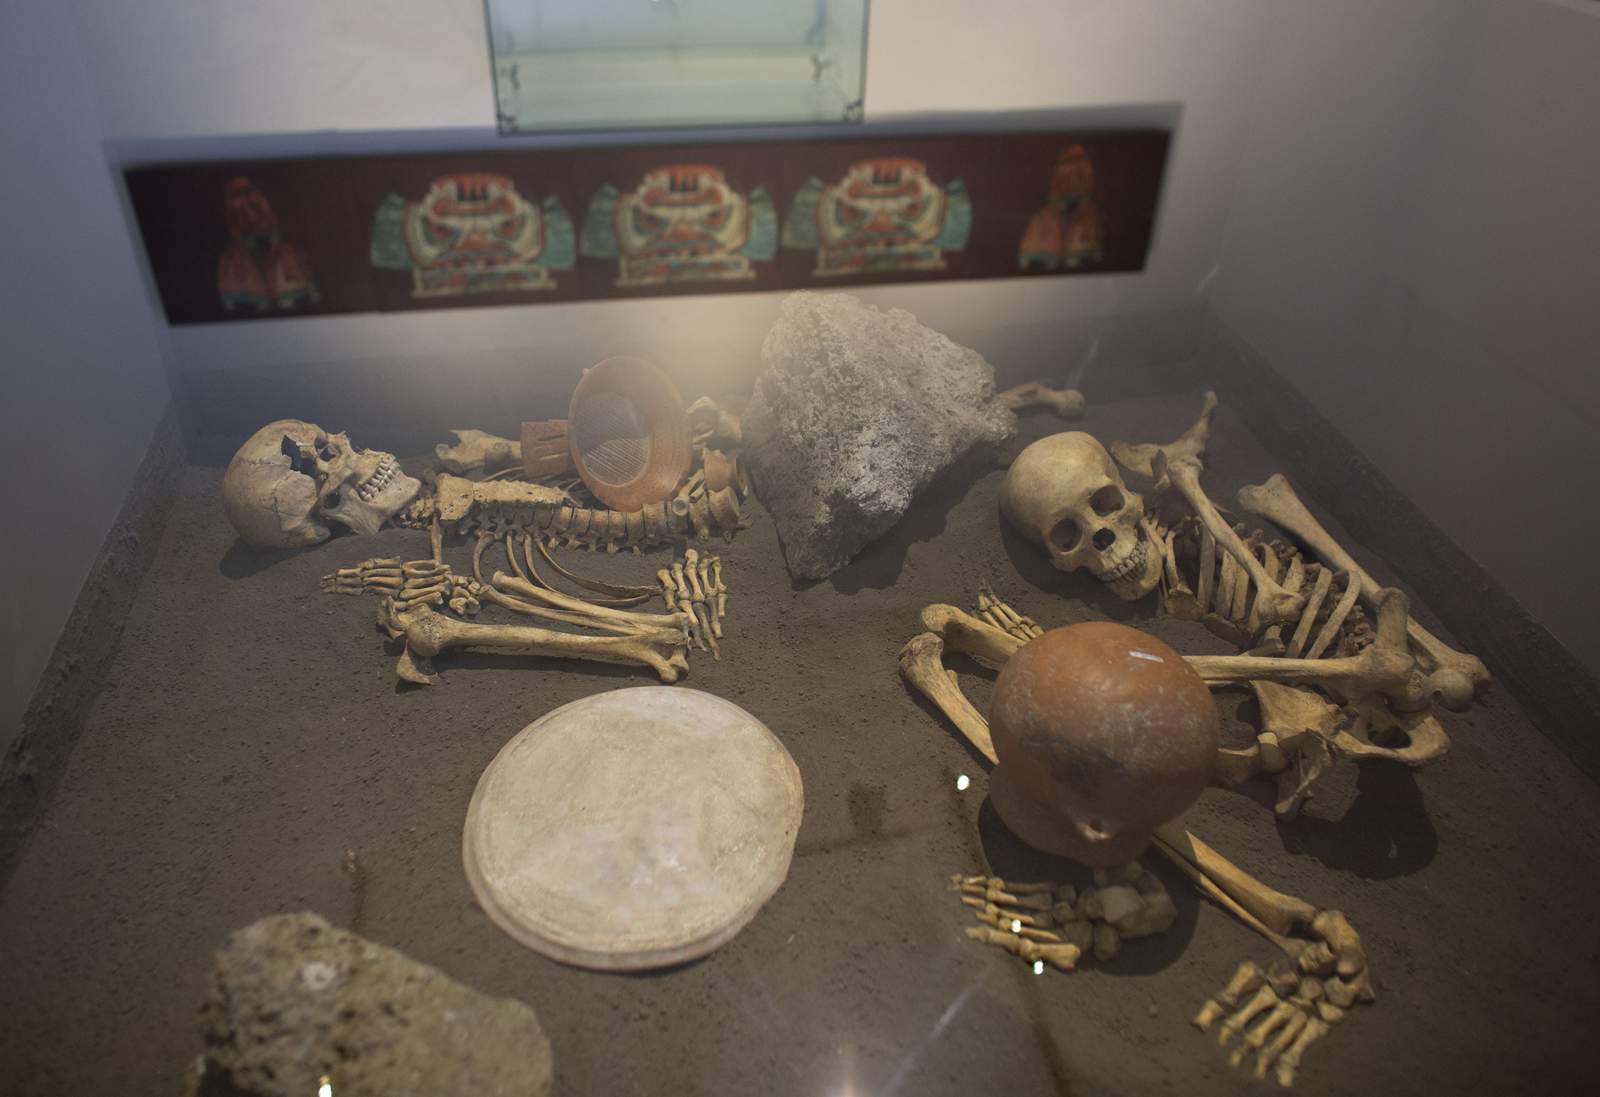 Spaniards killed women, kids over slaying of conquistadores